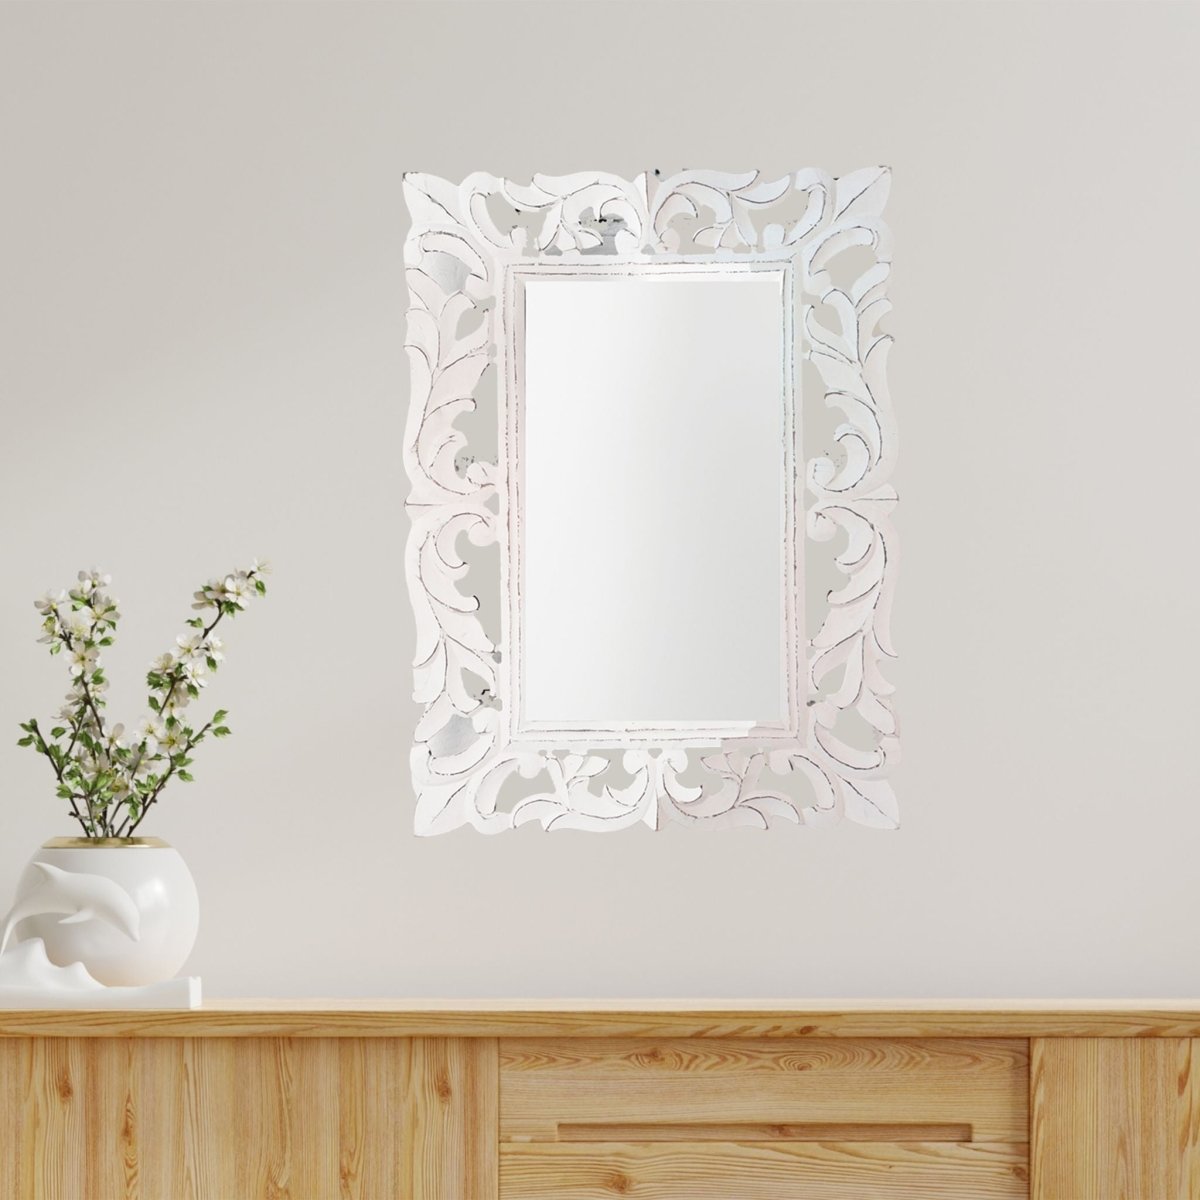 Kezevel Wooden Wall Hanging Mirror - Rectangle White Handcarved Vintage Decorative Mirrors for Living Room, Wall Showpiece